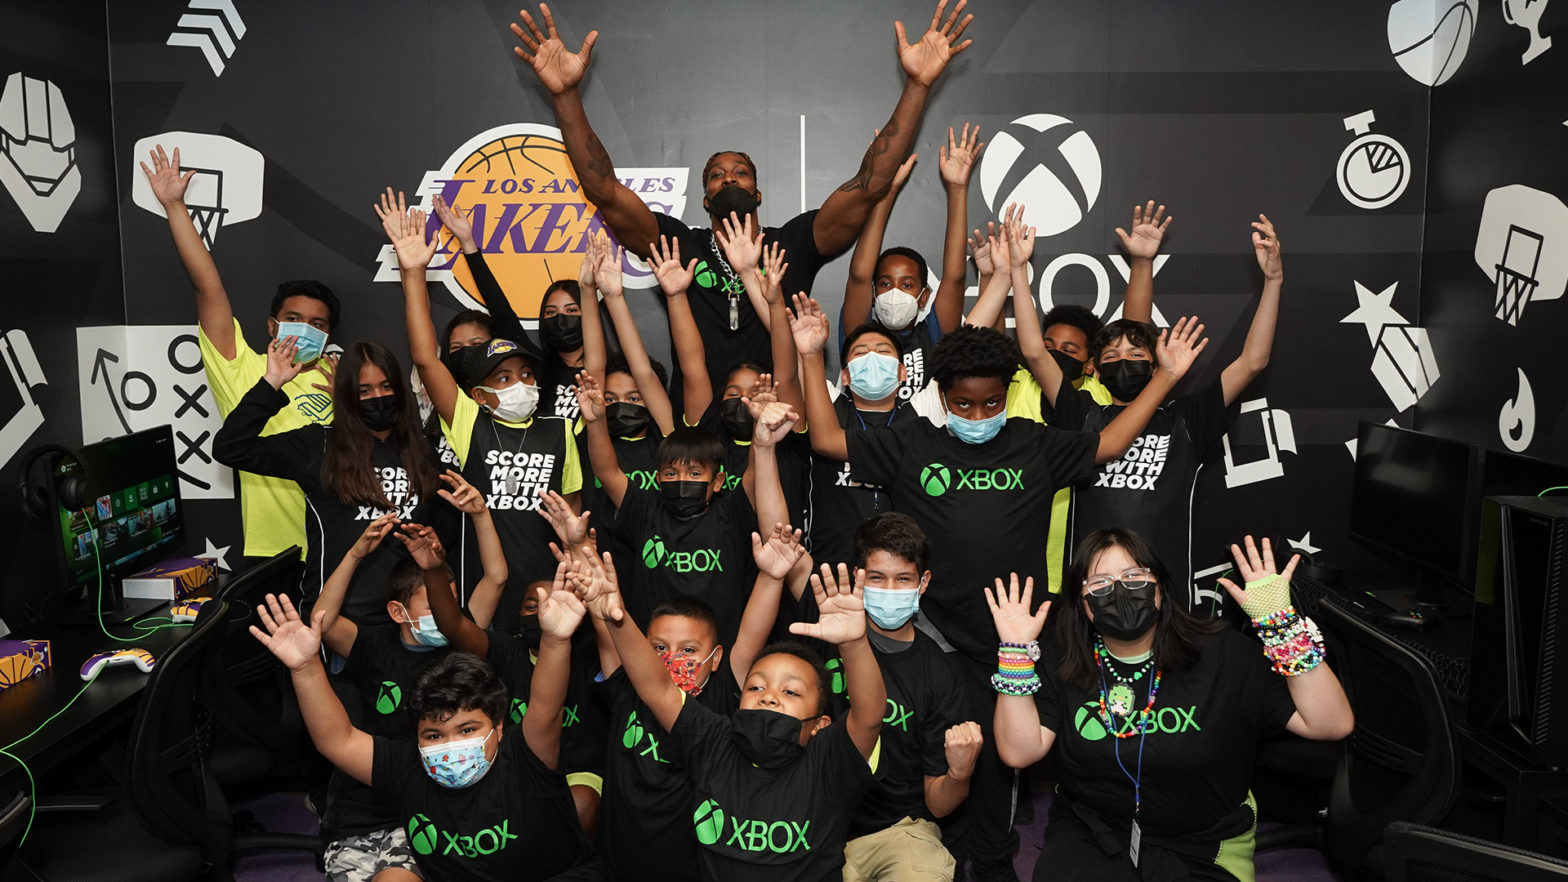 Dwight Howard, Los Angeles Lakers, and Xbox Team Up to Open Gaming Lab to Inspire Youth